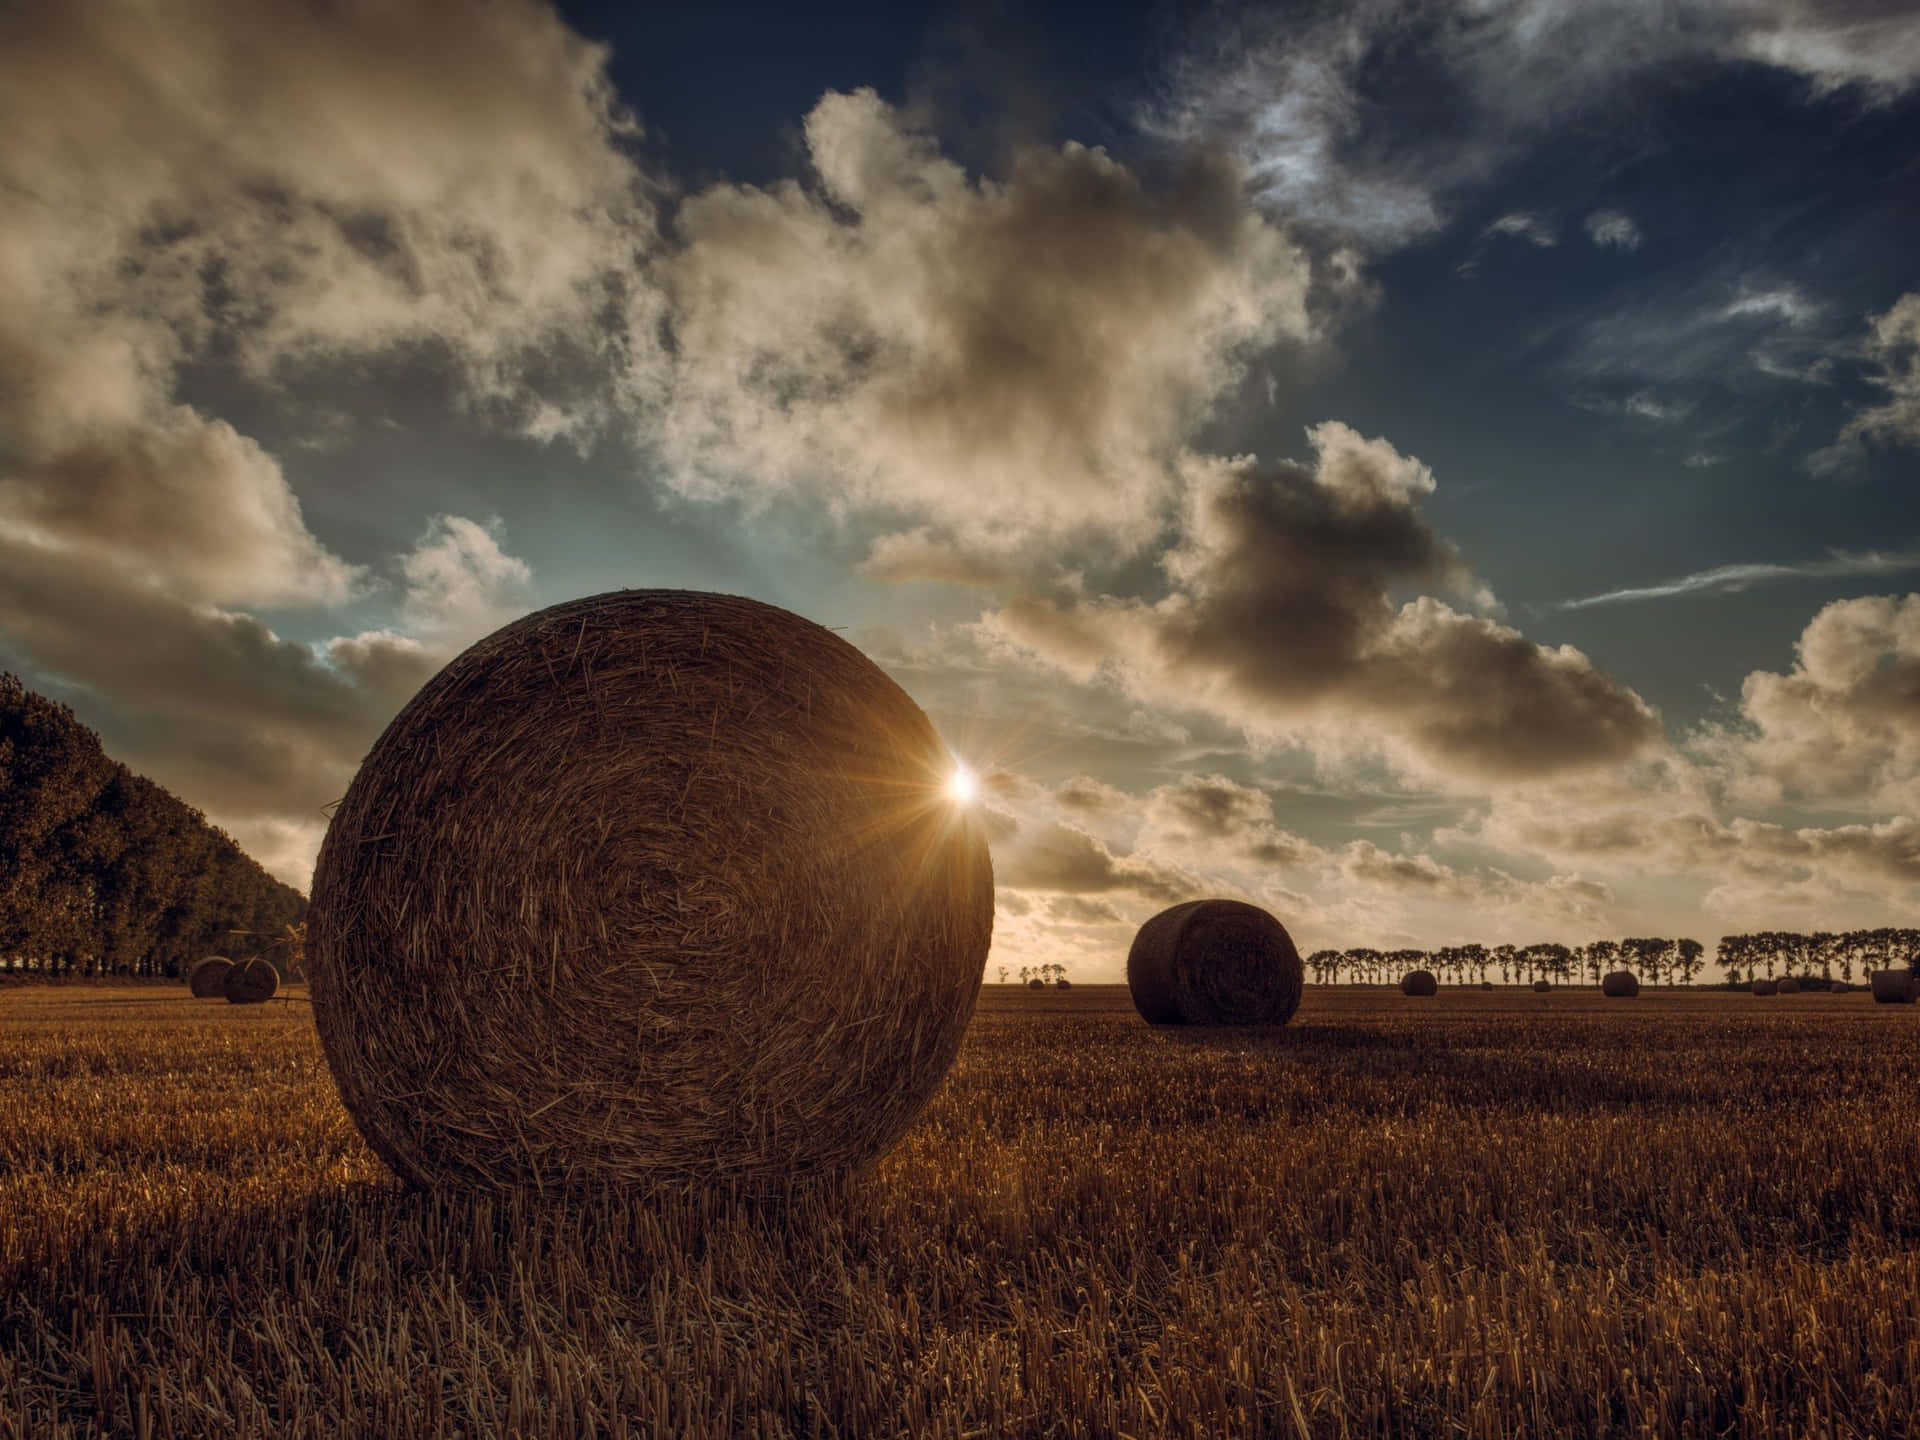 Hay Bales In A Field With The Sun Setting Behind Them